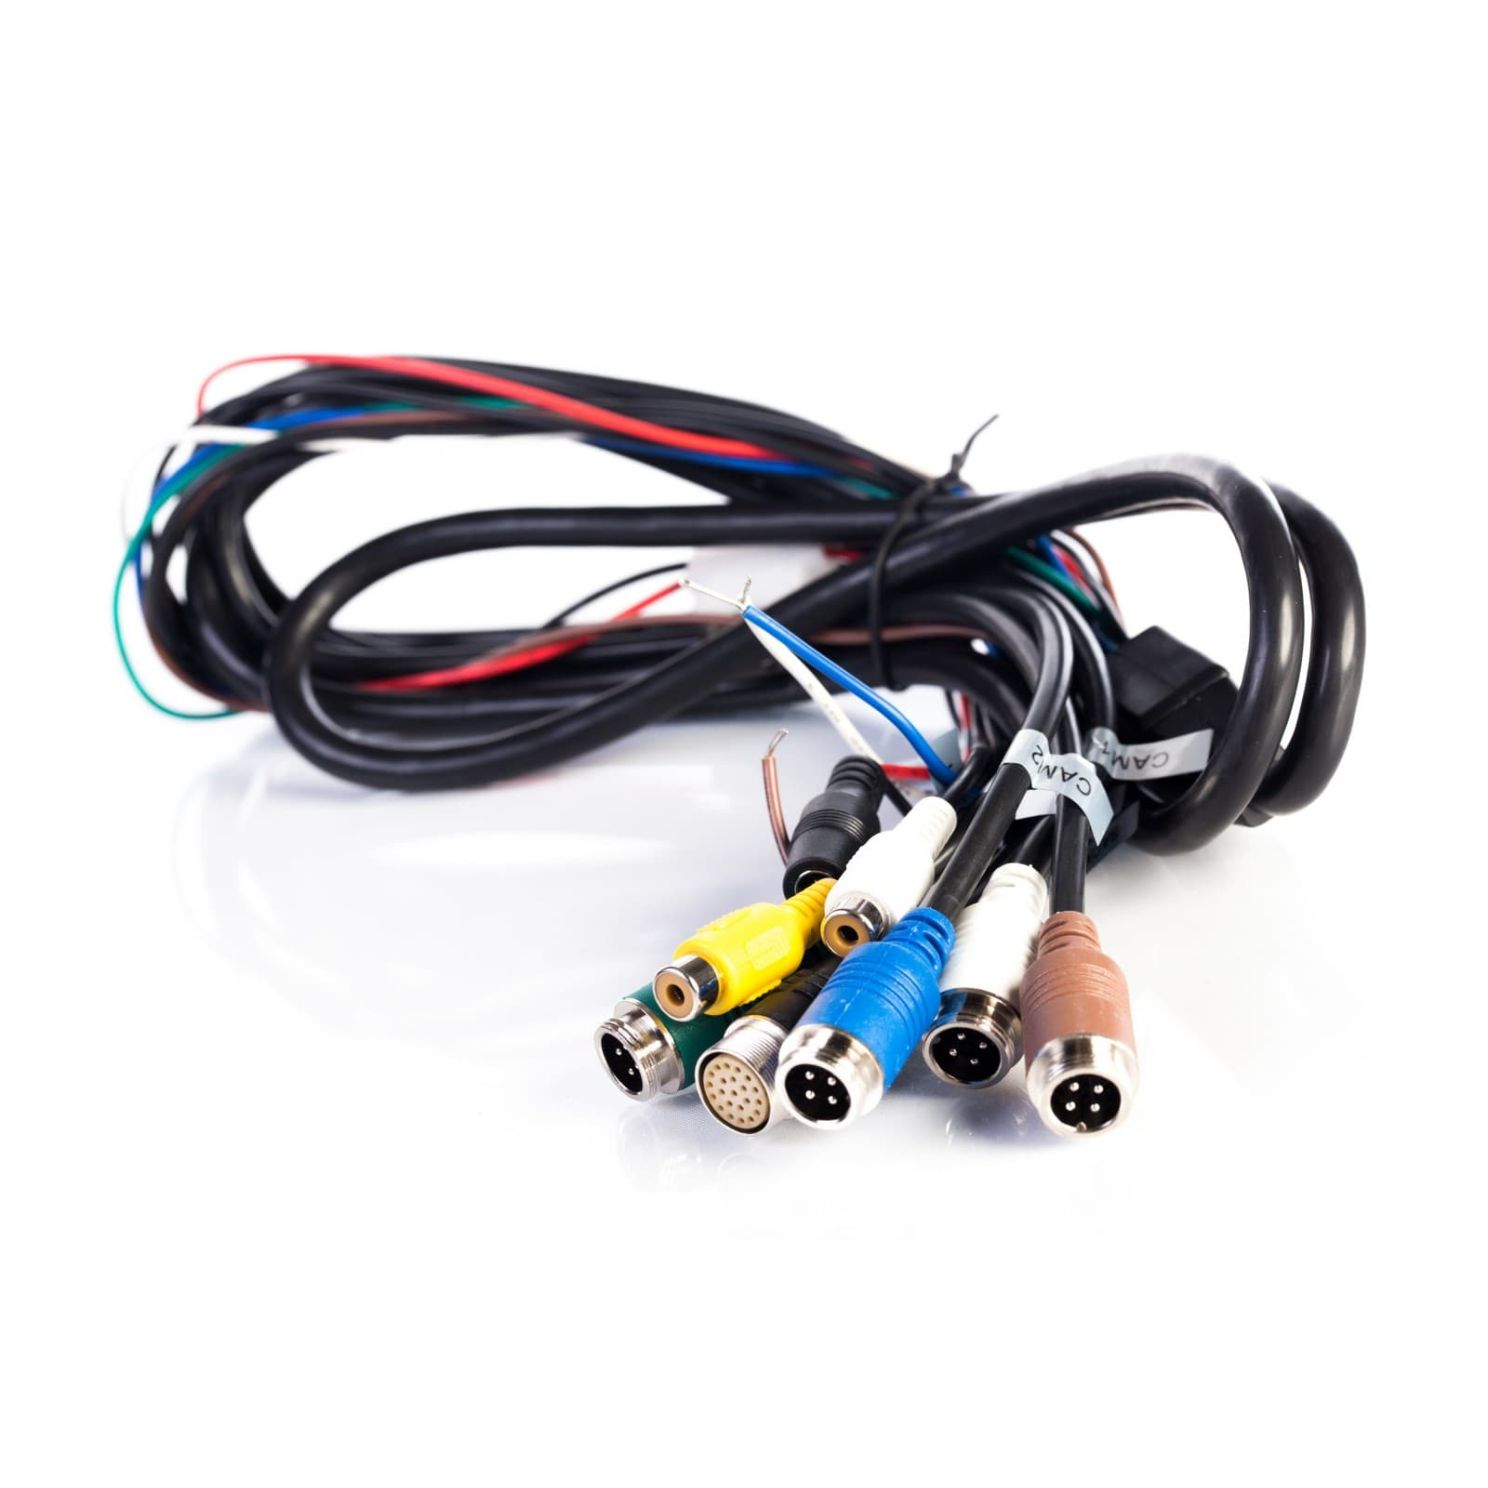 CabCam 22 pin wire harness for Touch Button Camera System